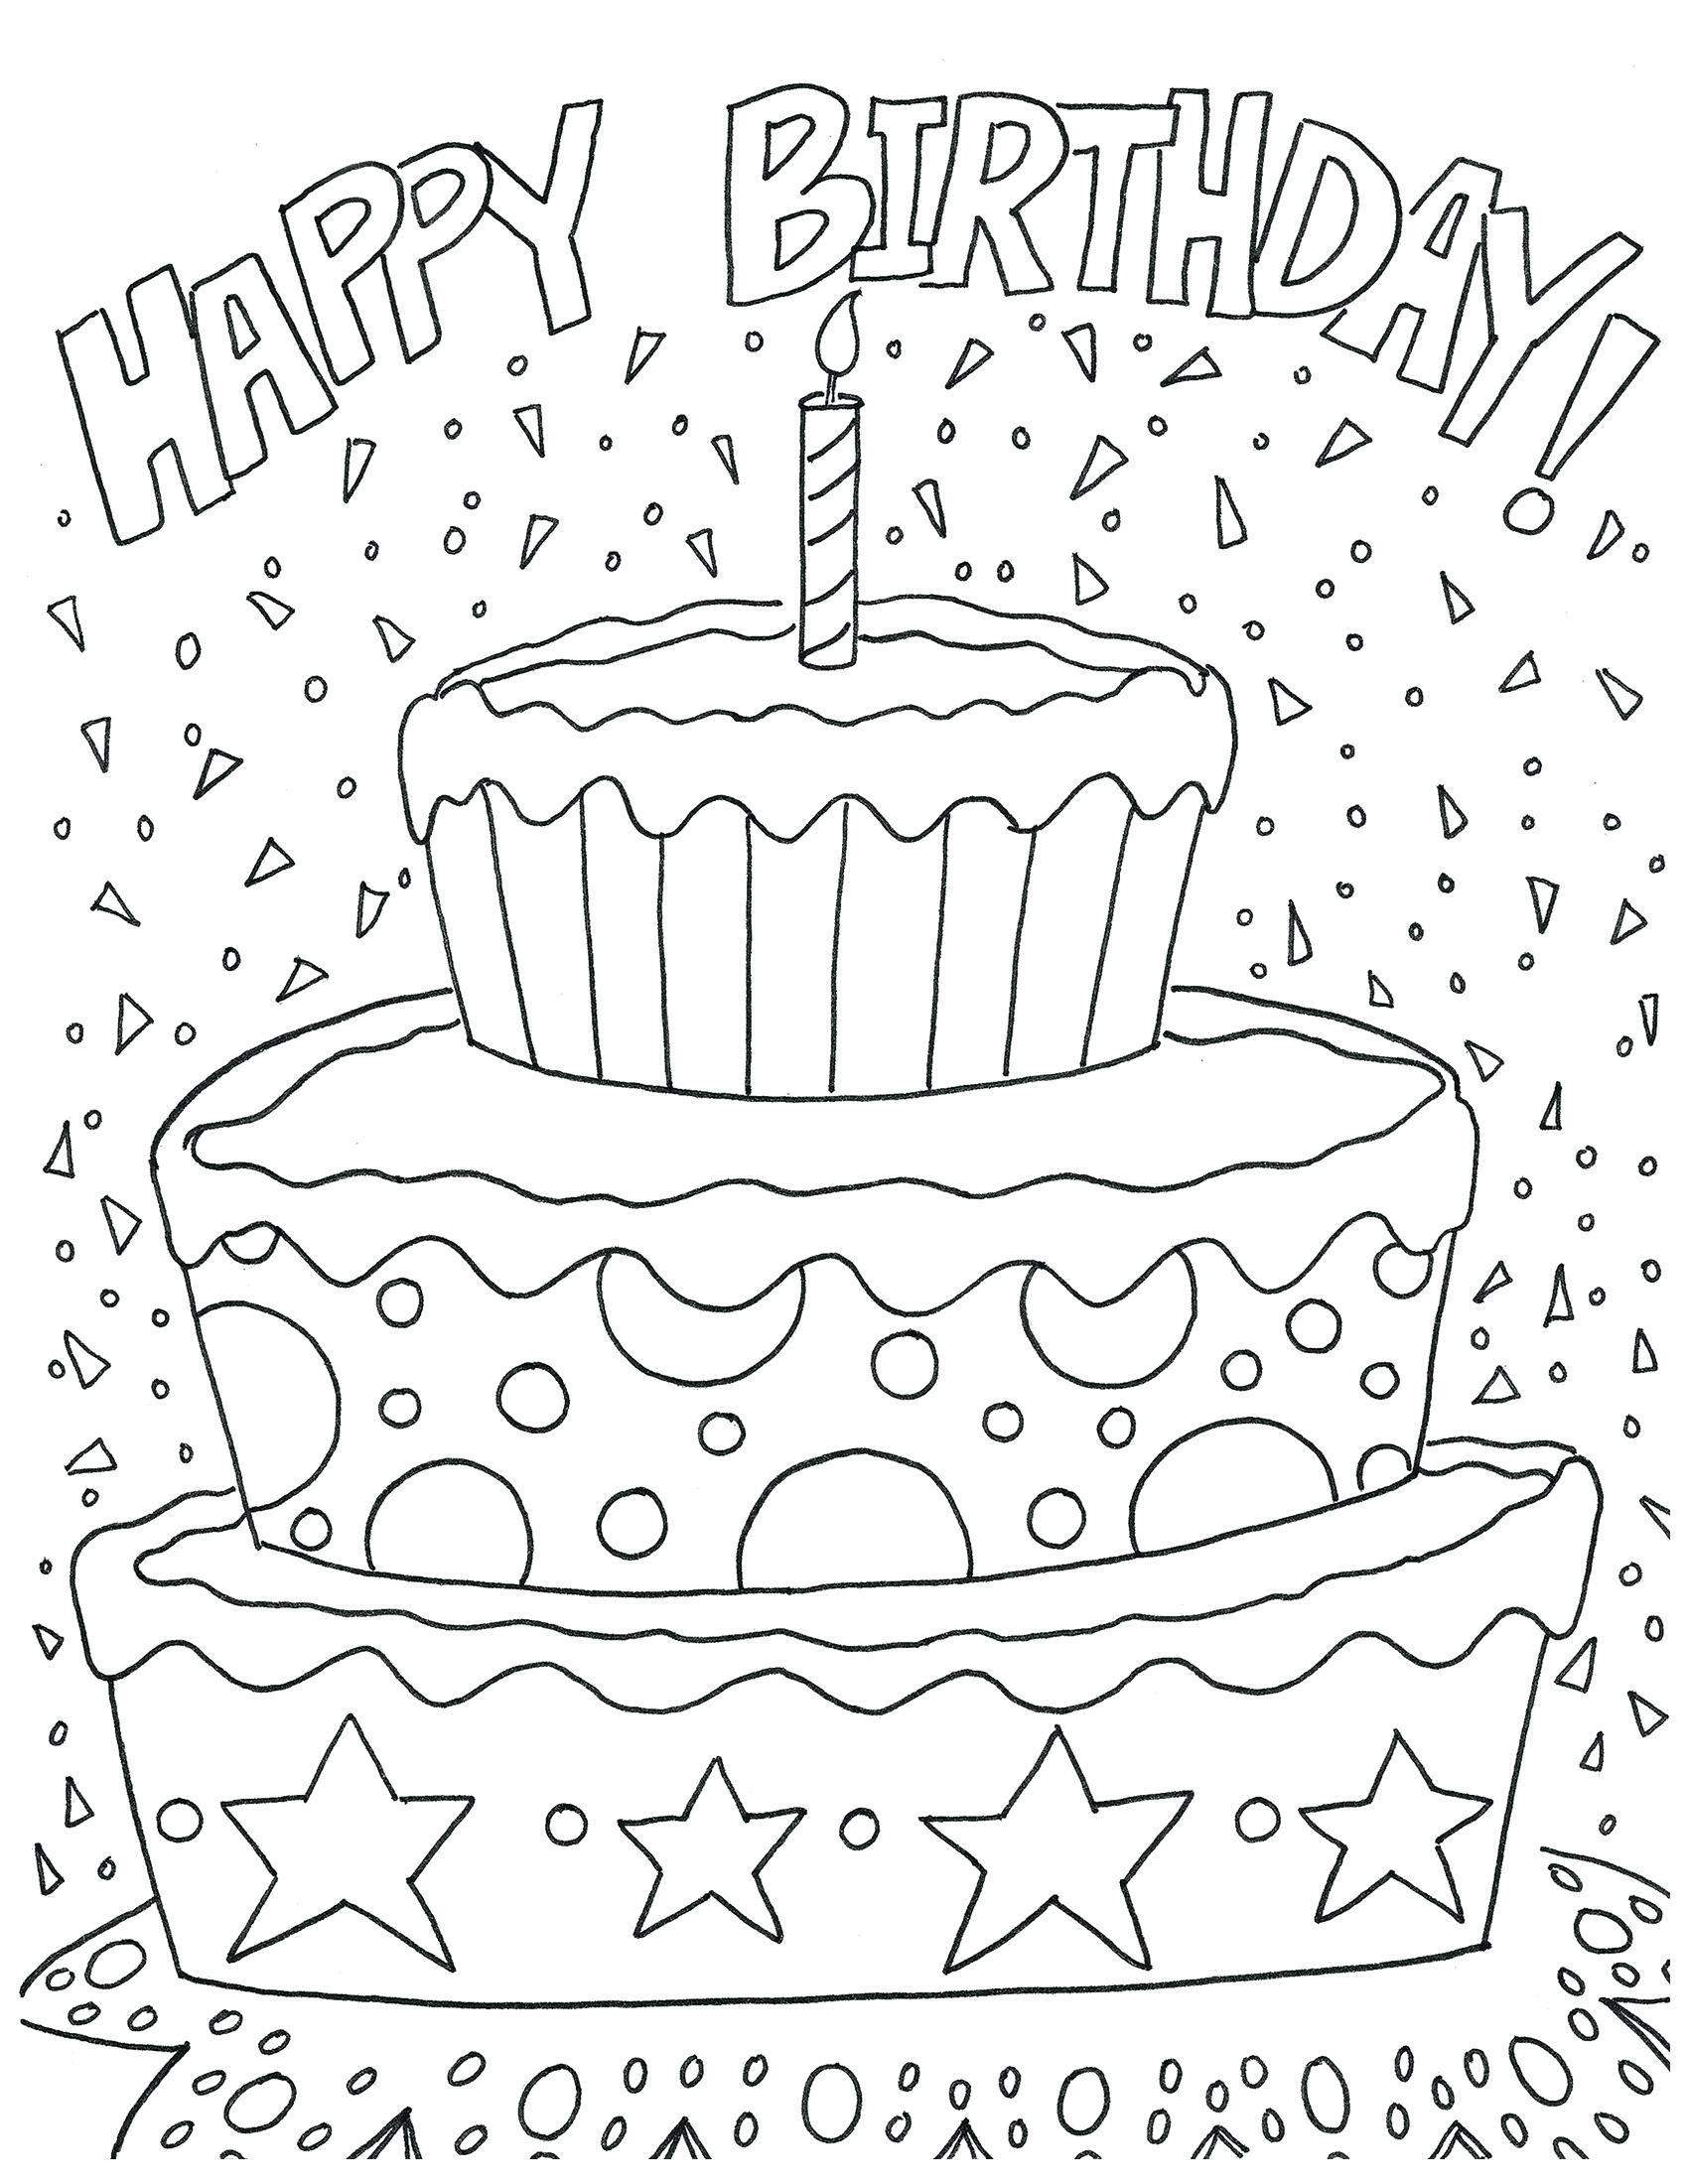 Birthday Coloring Pages For Adults at Free printable